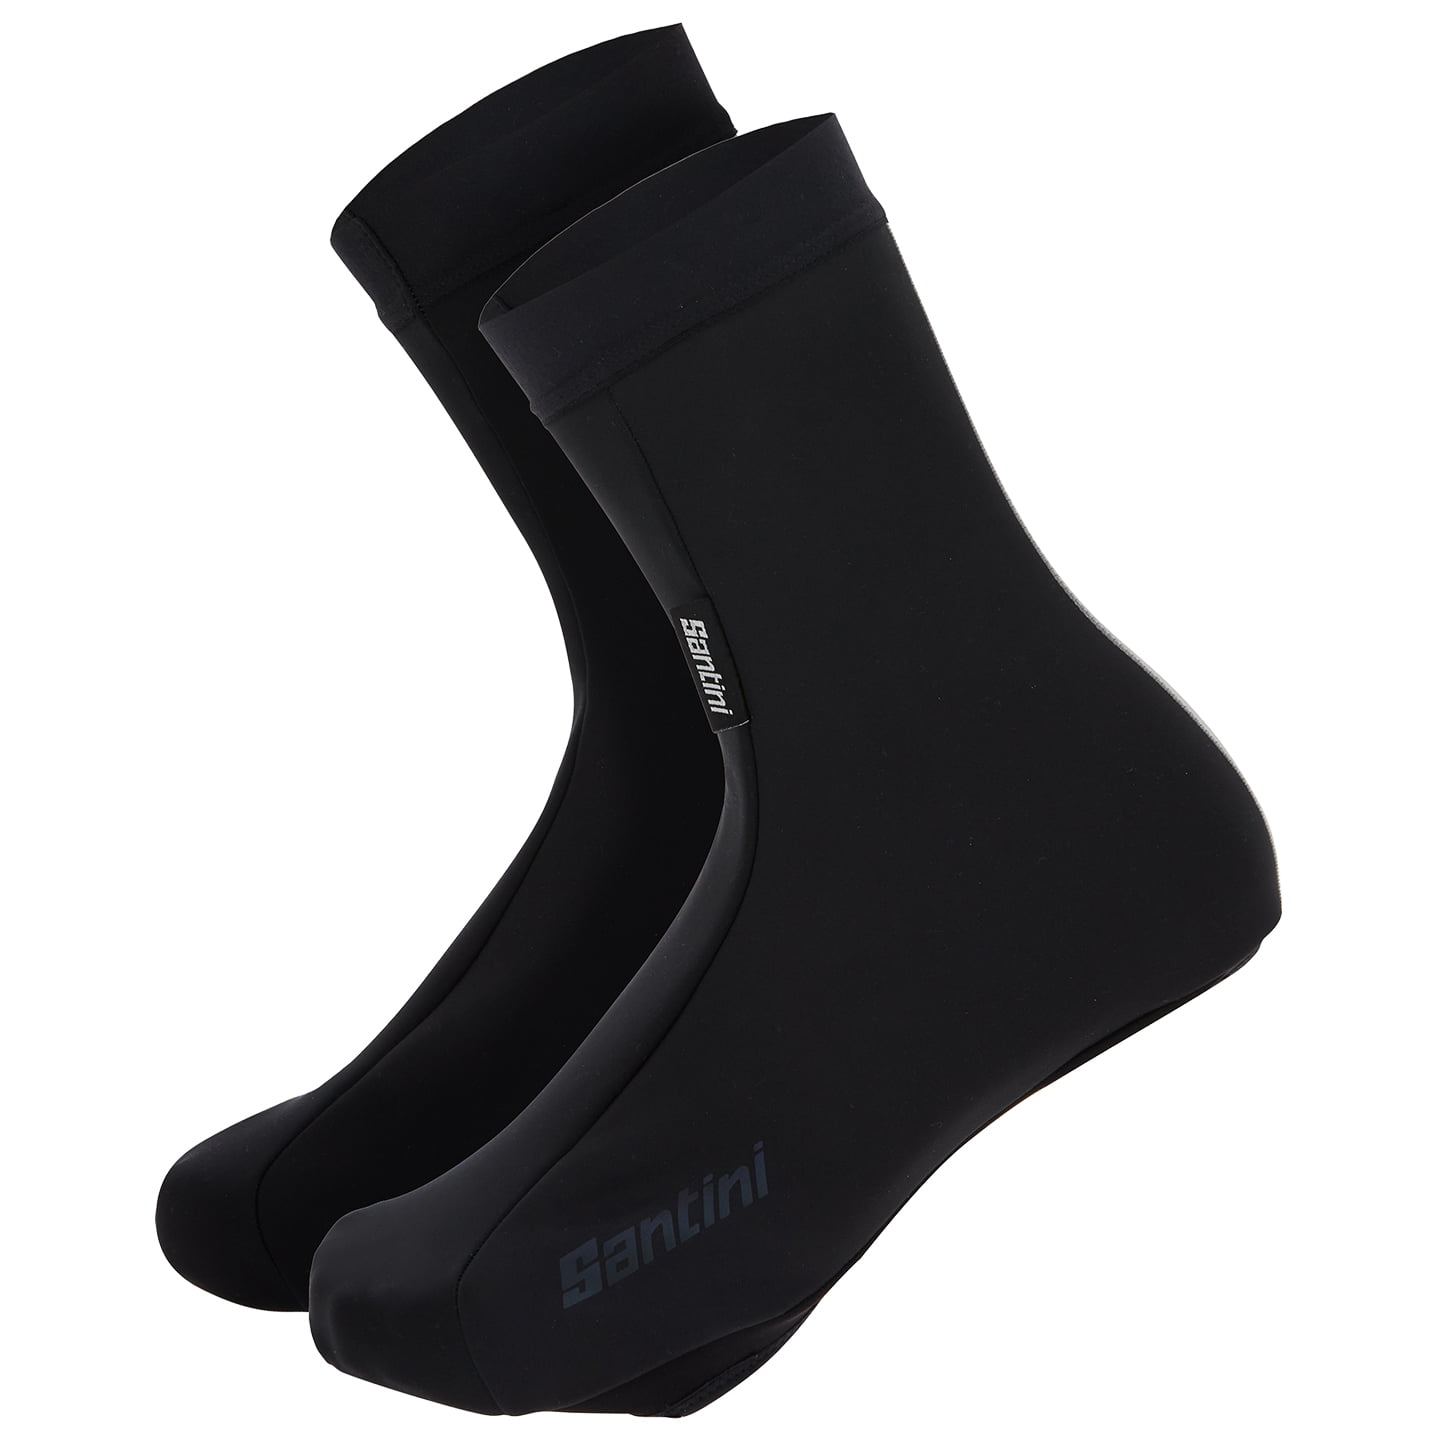 SANTINI Adapt Road Bike Thermal Shoe Covers Thermal Shoe Covers, Unisex (women / men), size XL, Cycling clothing